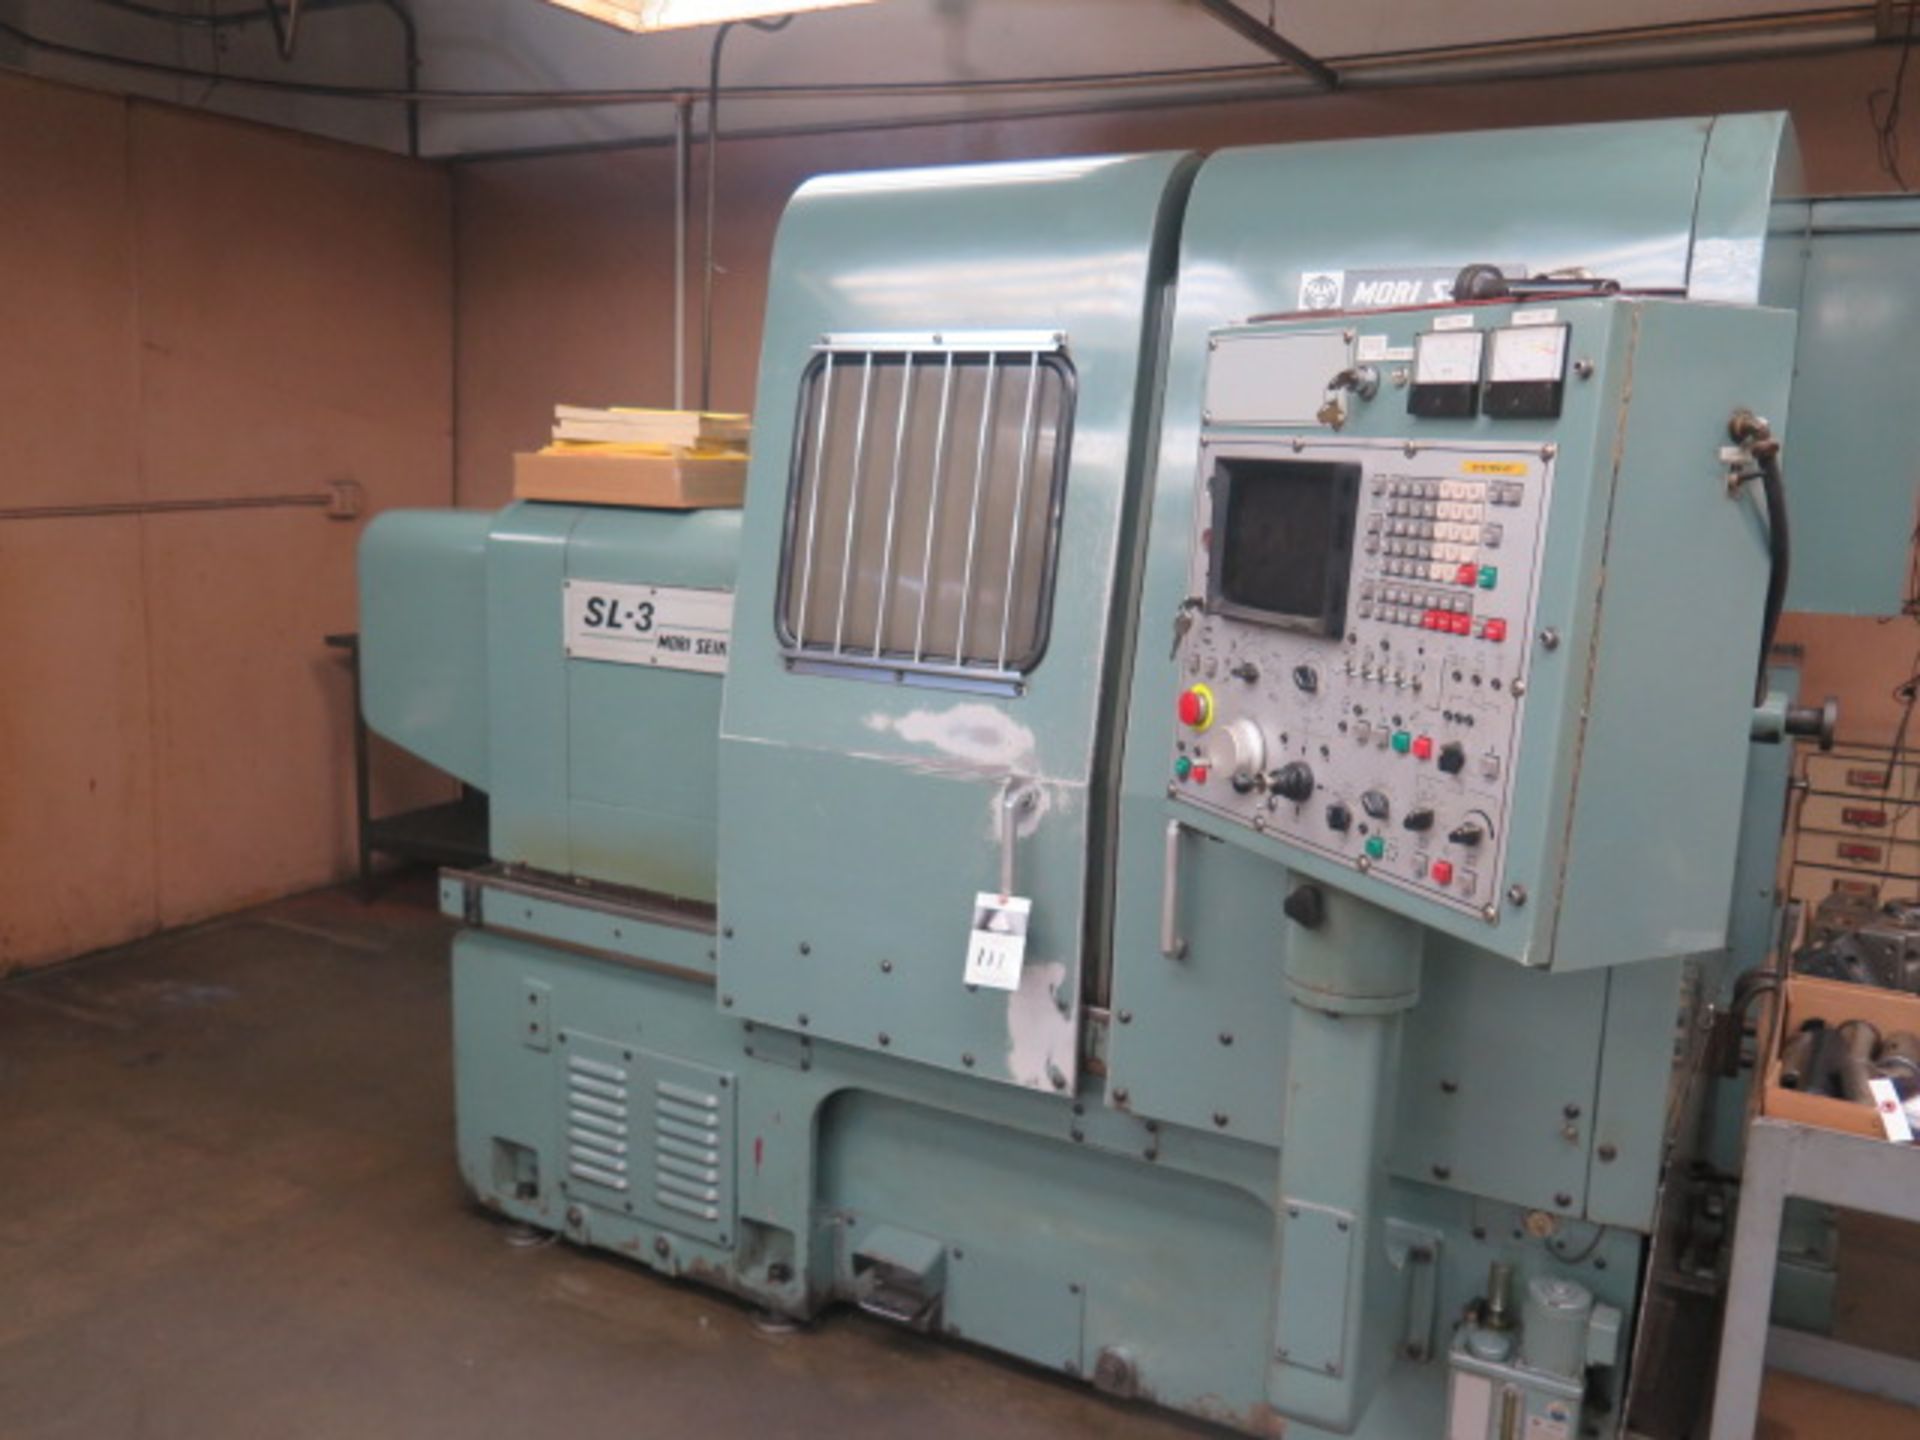 Mori Seiki SL-3A CNC Turning Center s/n 3141 w/ Fanuc 6T Controls, 12-Station Turret, SOLD AS IS - Image 2 of 15